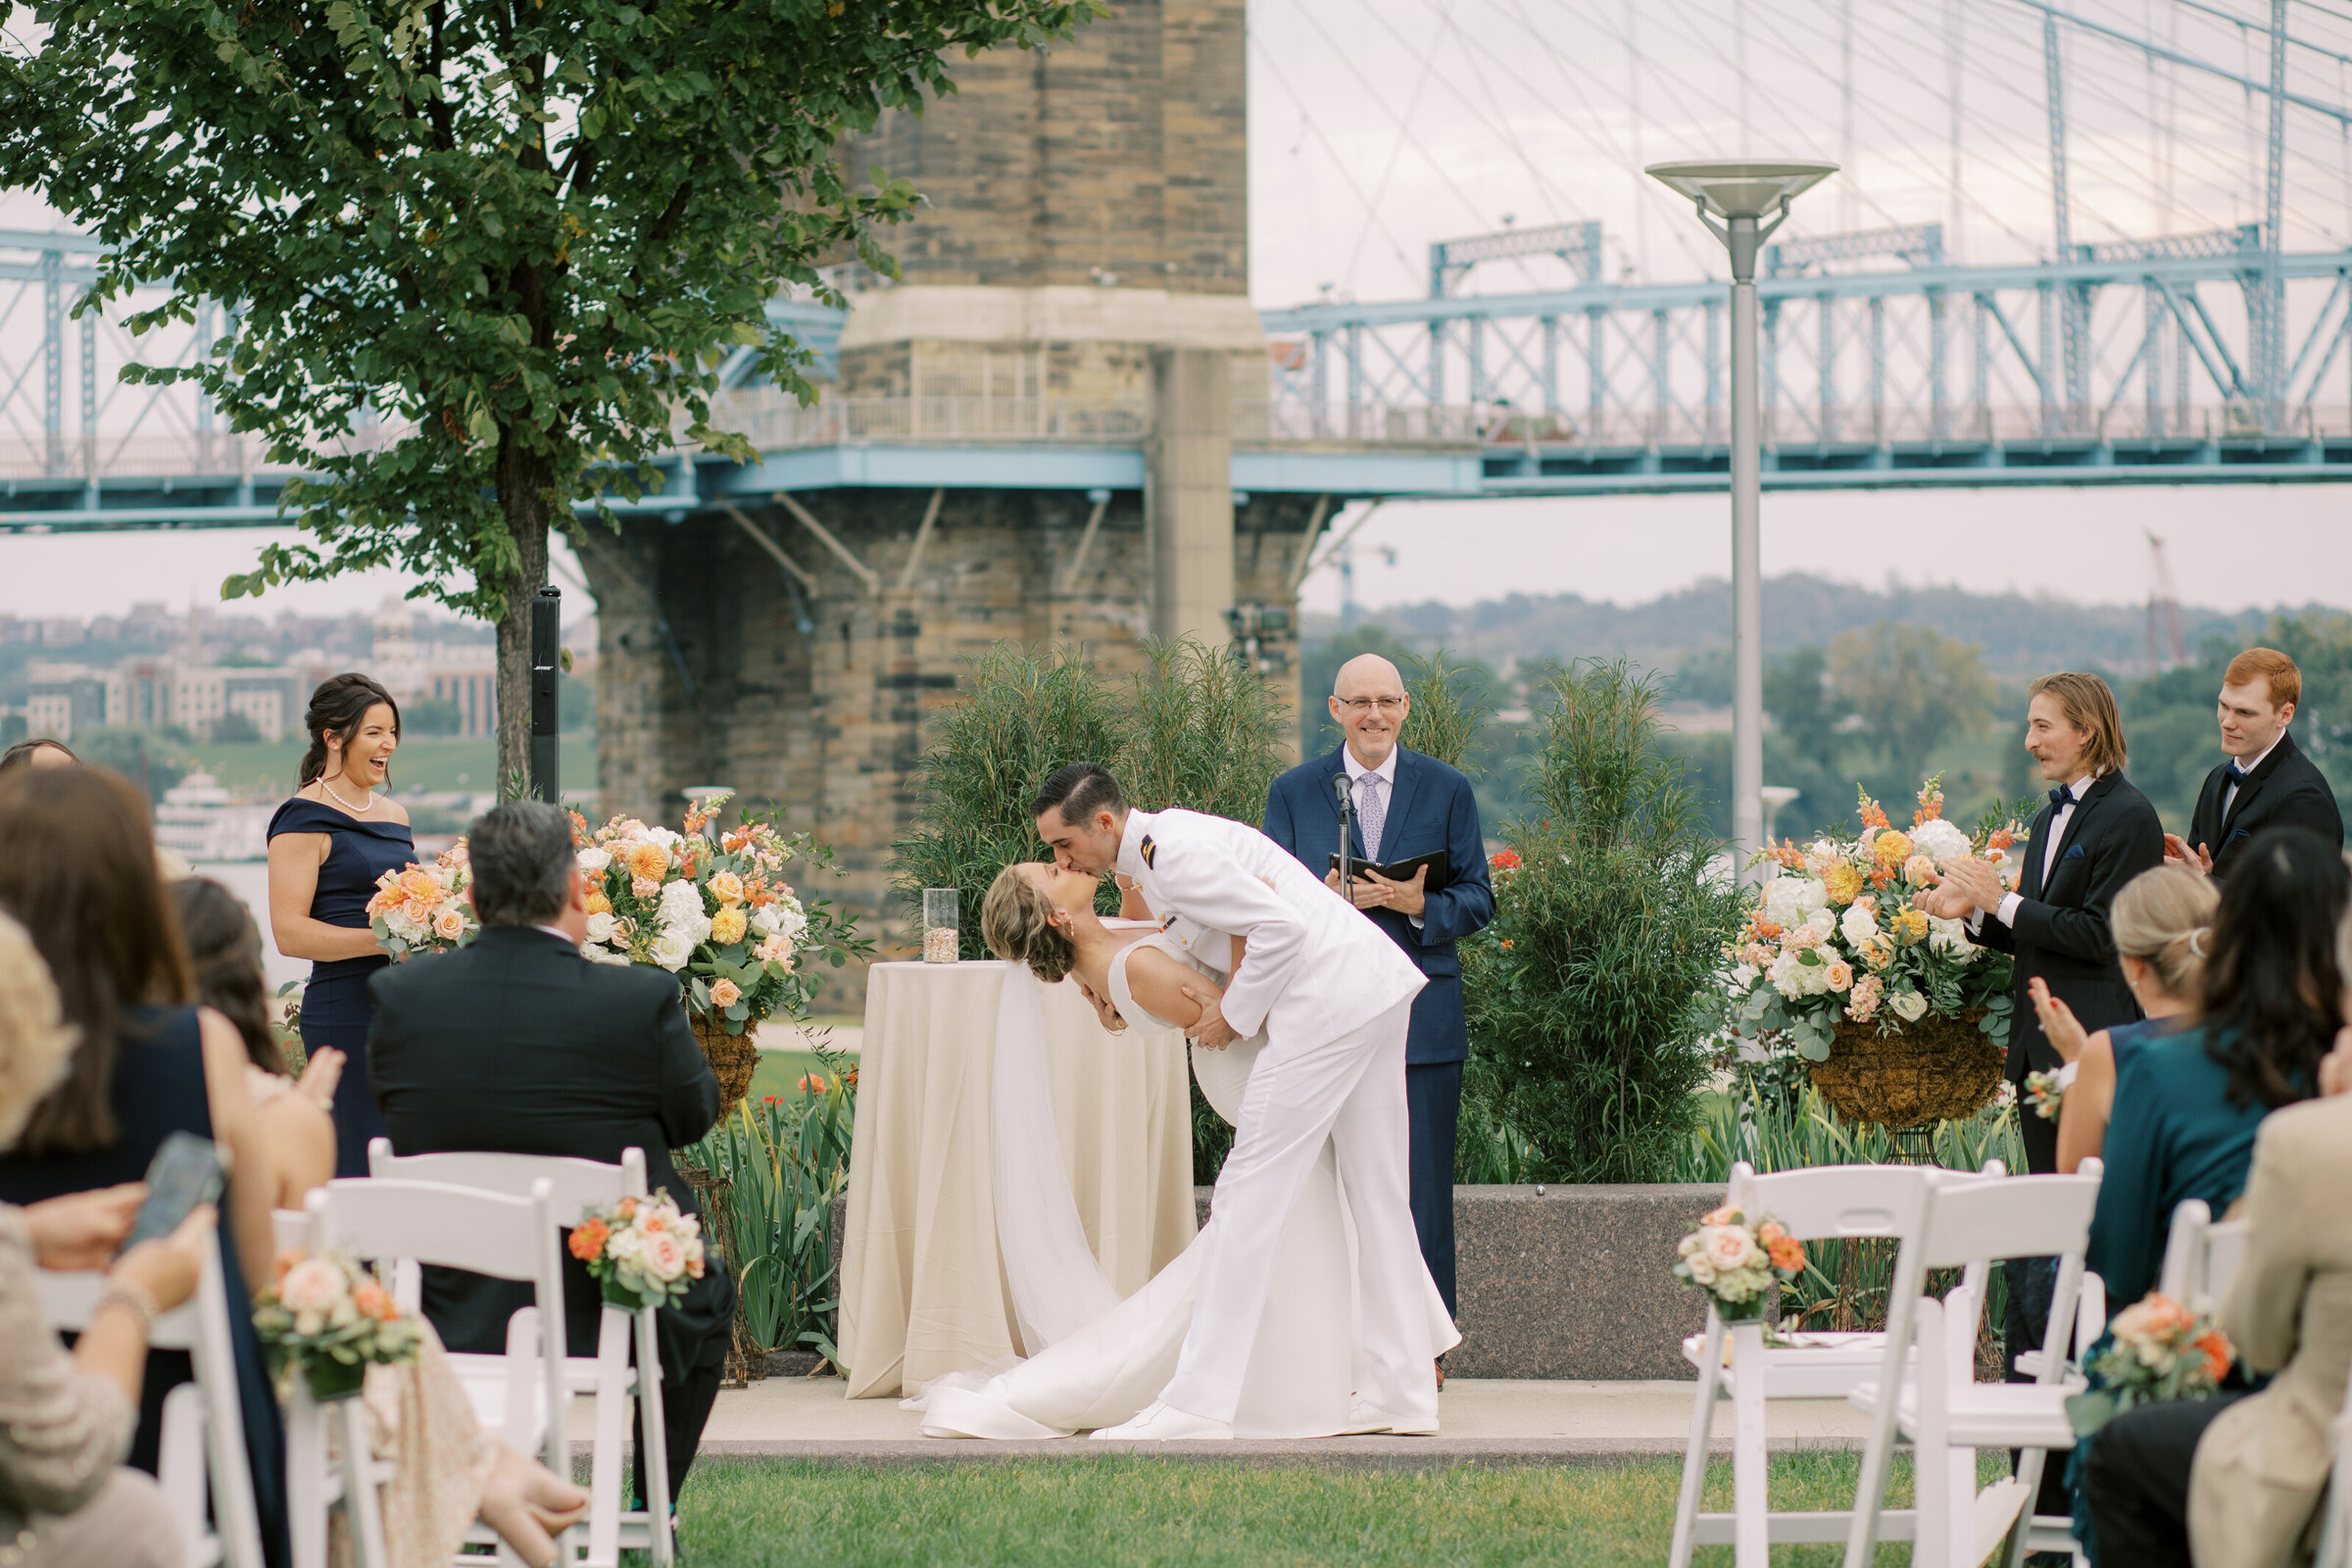 A couple shares their first kiss in front of the bridges downtown Cincinnati.